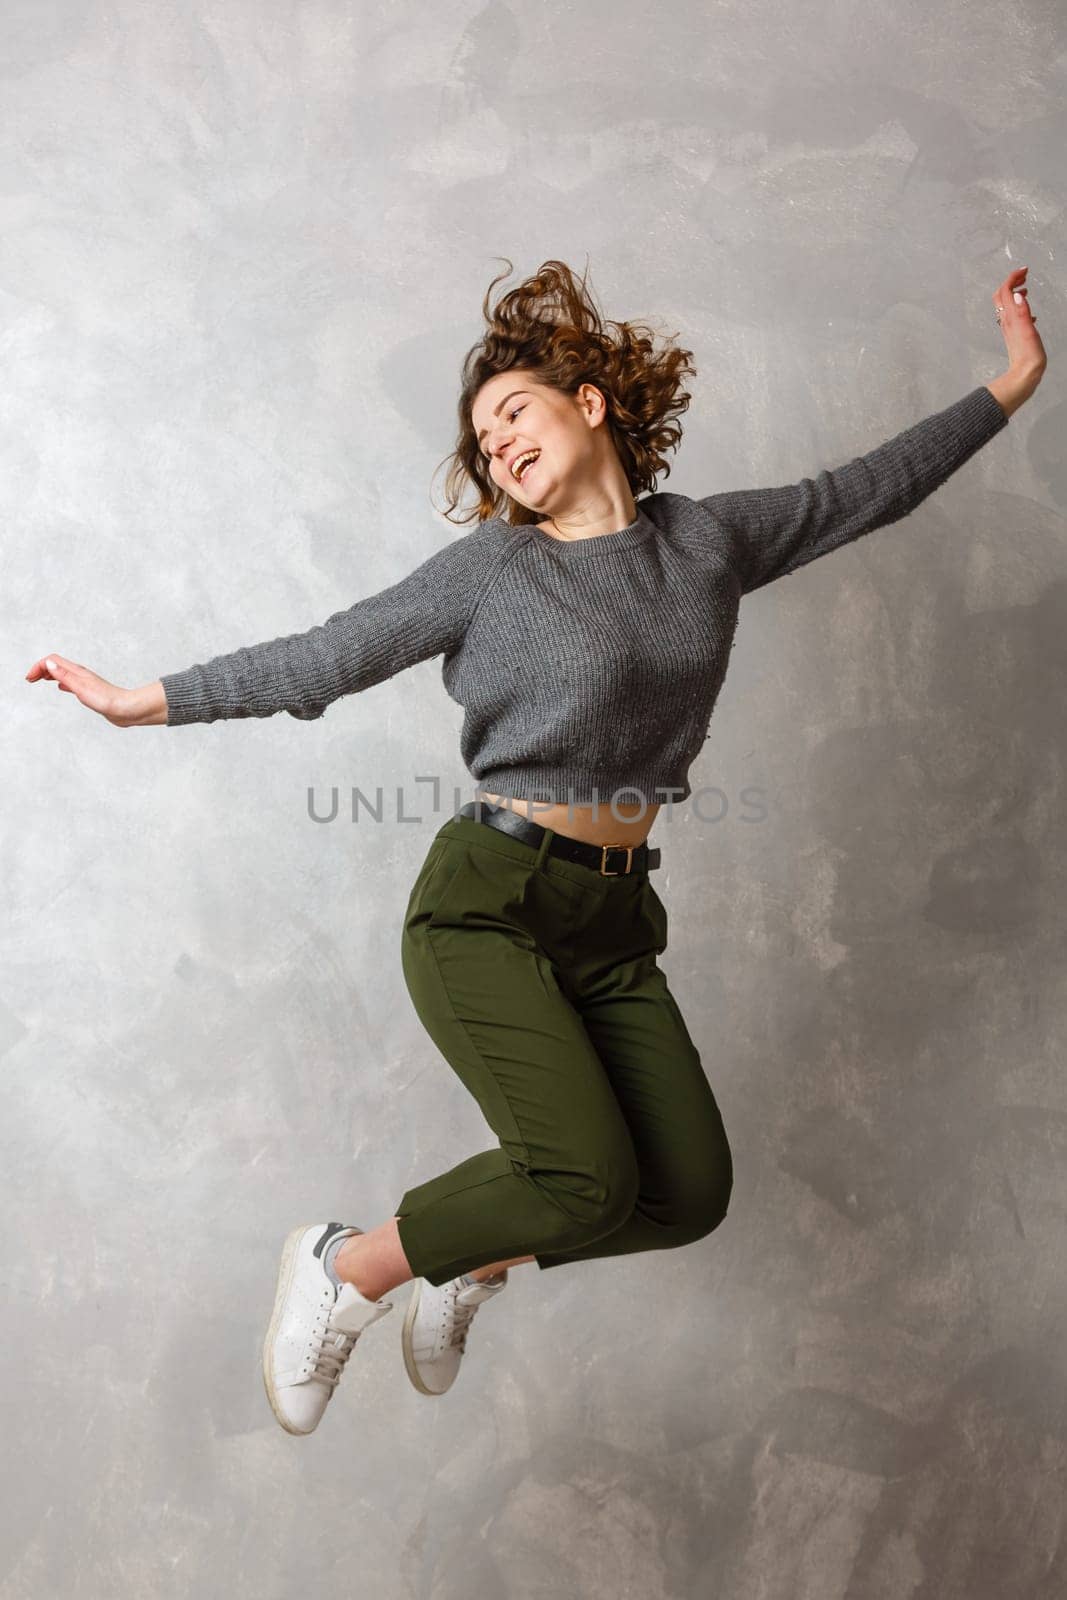 Portrait of cheerful positive girl jumping in the air with raised fists looking at camera isolated.